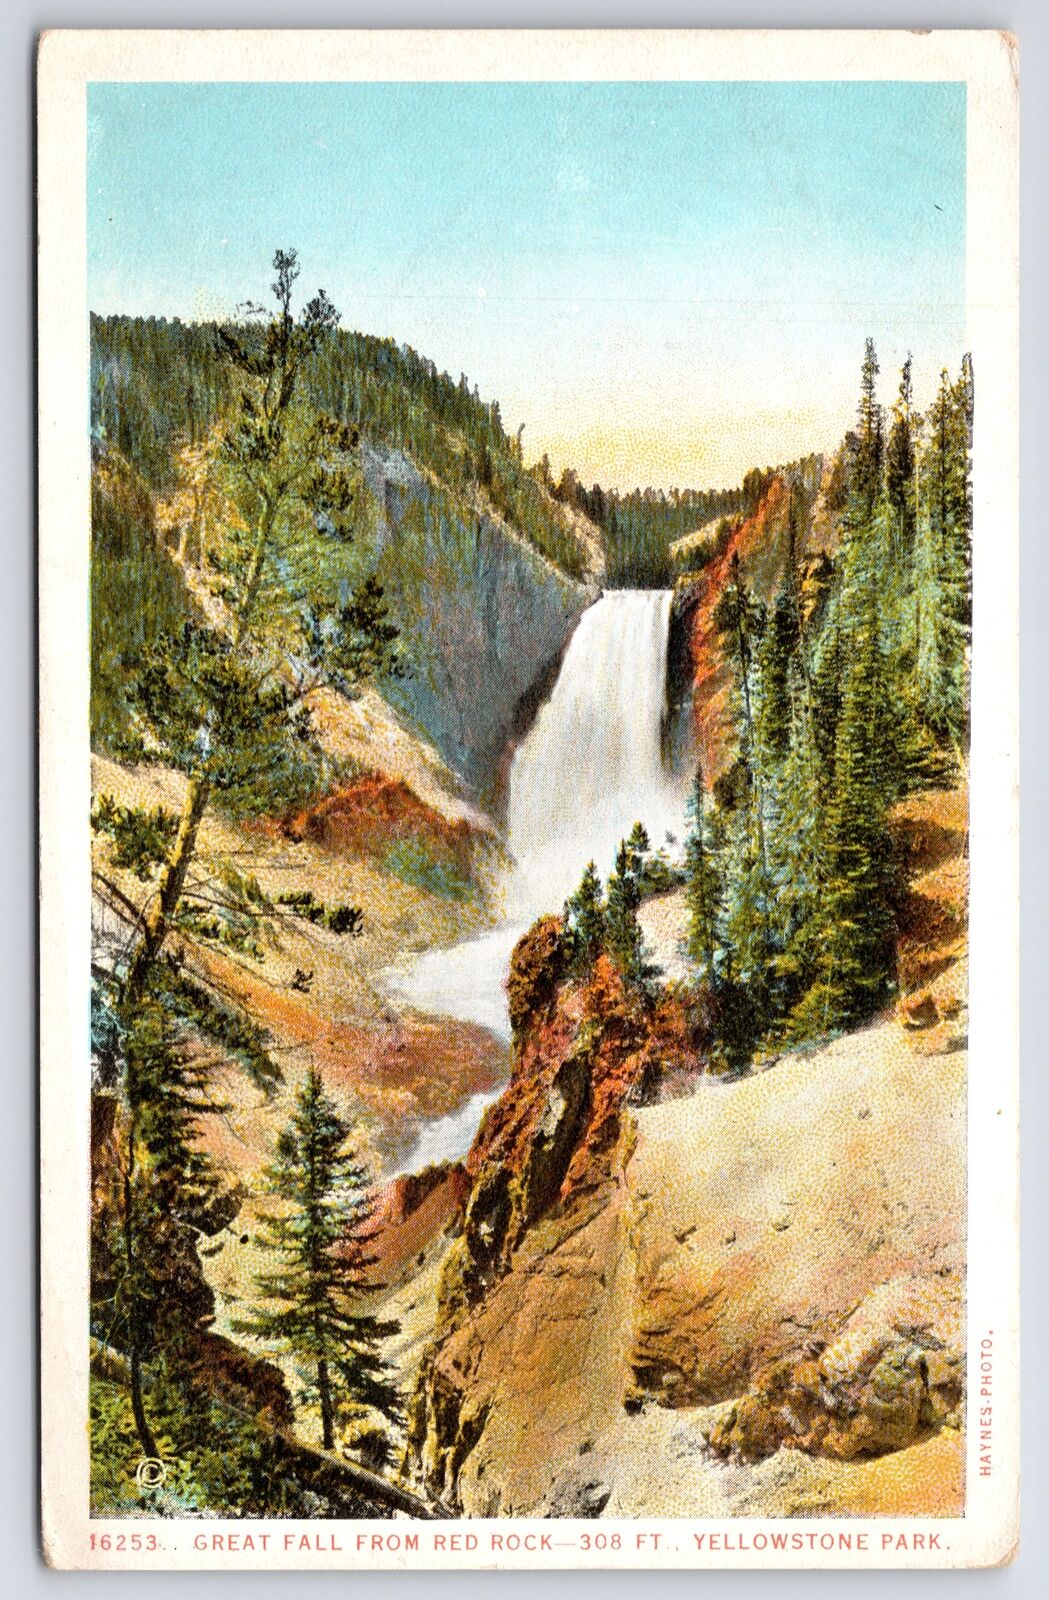 Yellowstone Nat'l Park Montana~Great Fall From Red Rock~Vintage Haynes Postcard